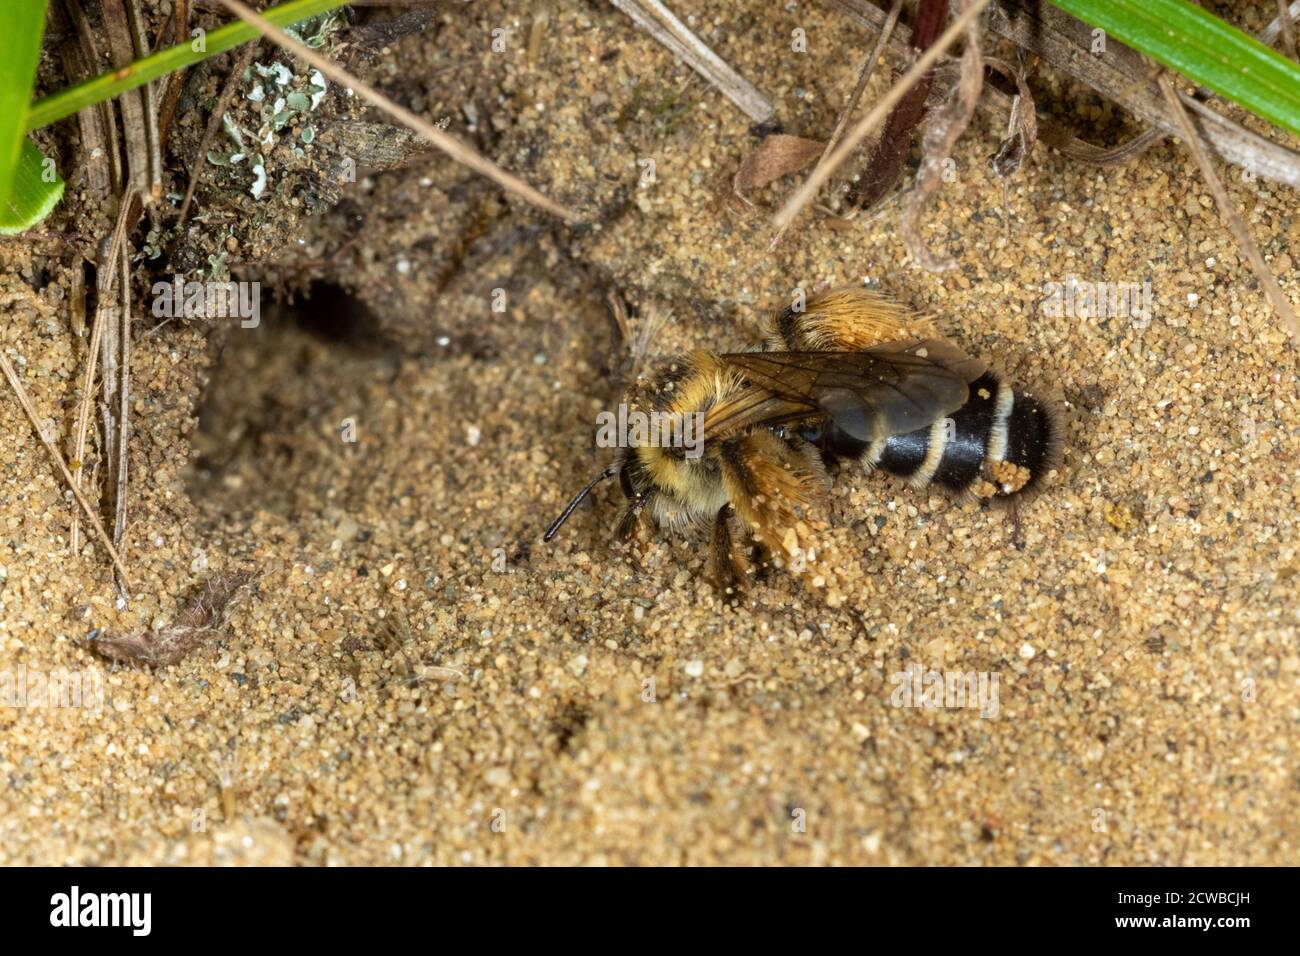 Dasypoda hirtipes, bee on the sand, Special Reserve 'Djurdjevac Sands' in Croatia Stock Photo